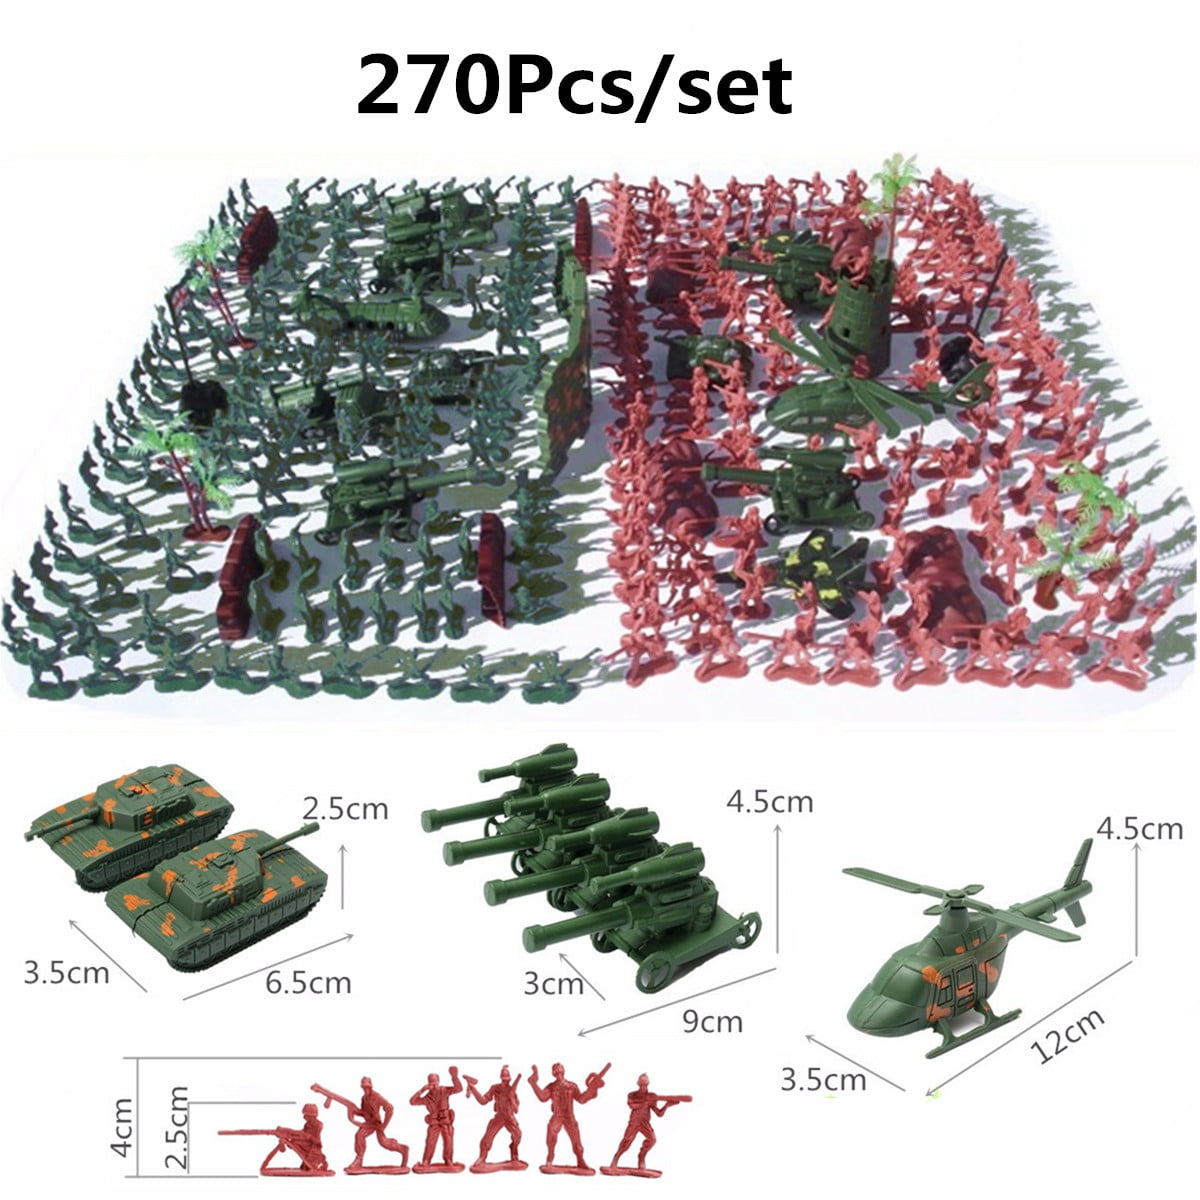 307 pcs/set Military Playset Plastic Toy Soldier Army Men Figures & Accessories 